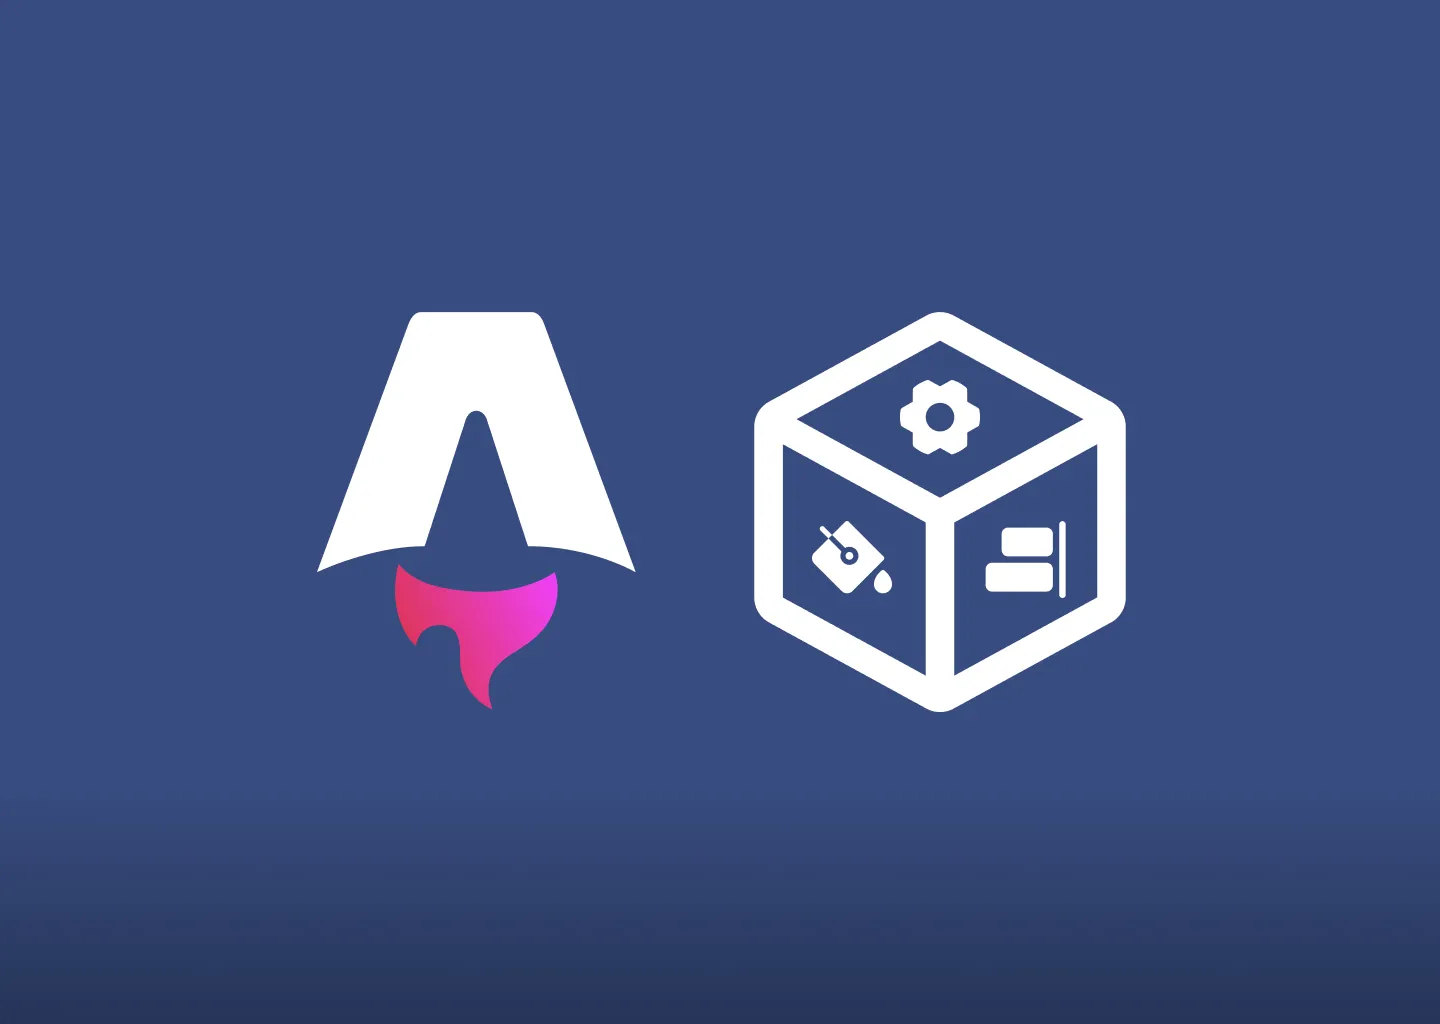 Astro logo and a cube with a cog icon, paint bucket icon, and an icon for alignment on the sides of the cube.